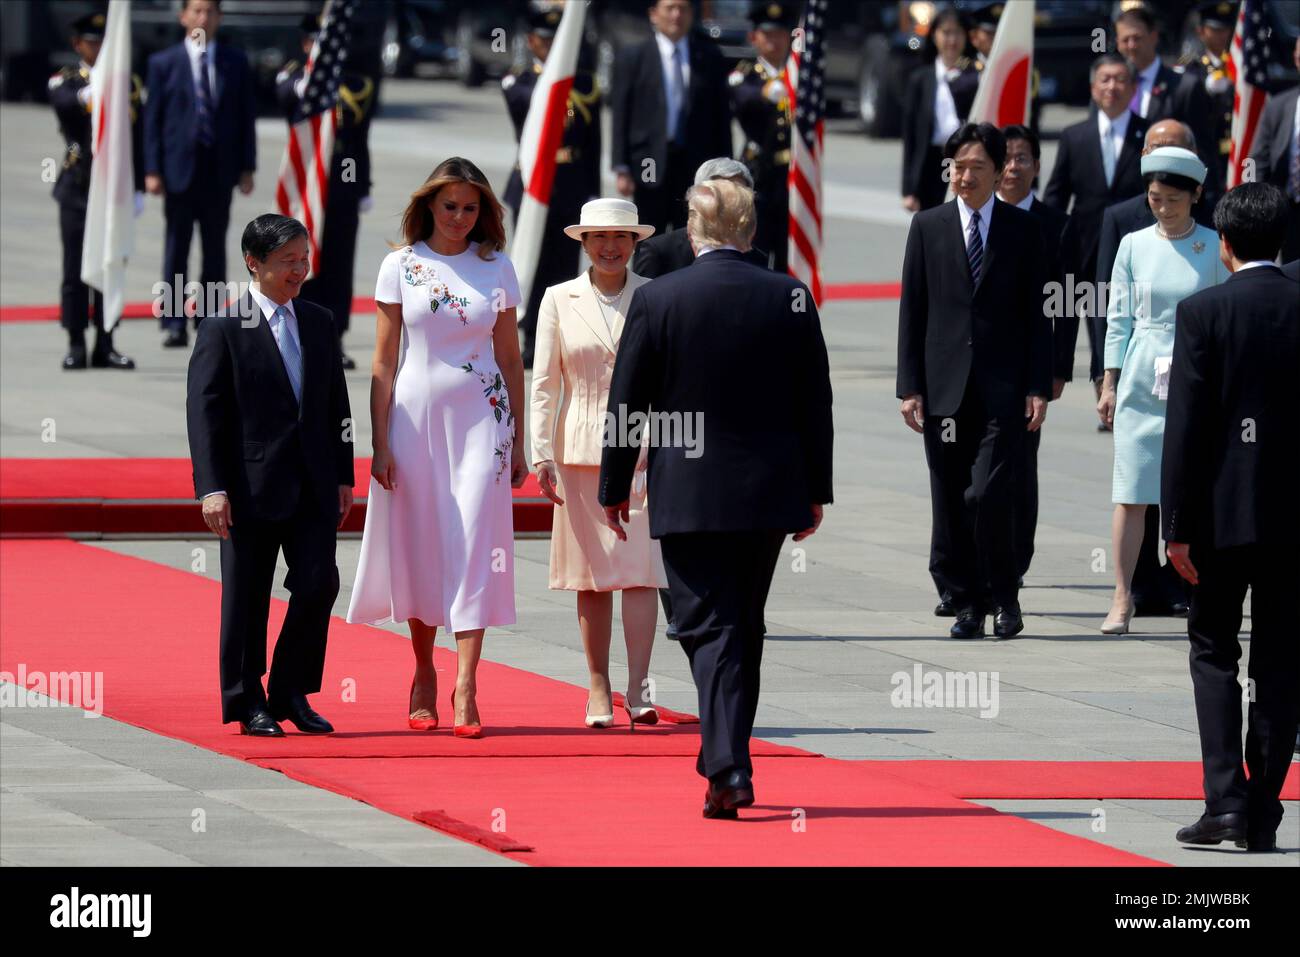 President Donald Trump and first lady Melania Trump participate with  Japanese Emperor Naruhito and Japanese Empress Masako in a Imperial Palace  welcome ceremony Monday, May 27, 2019, in Tokyo. (AP Photo/Evan Vucci